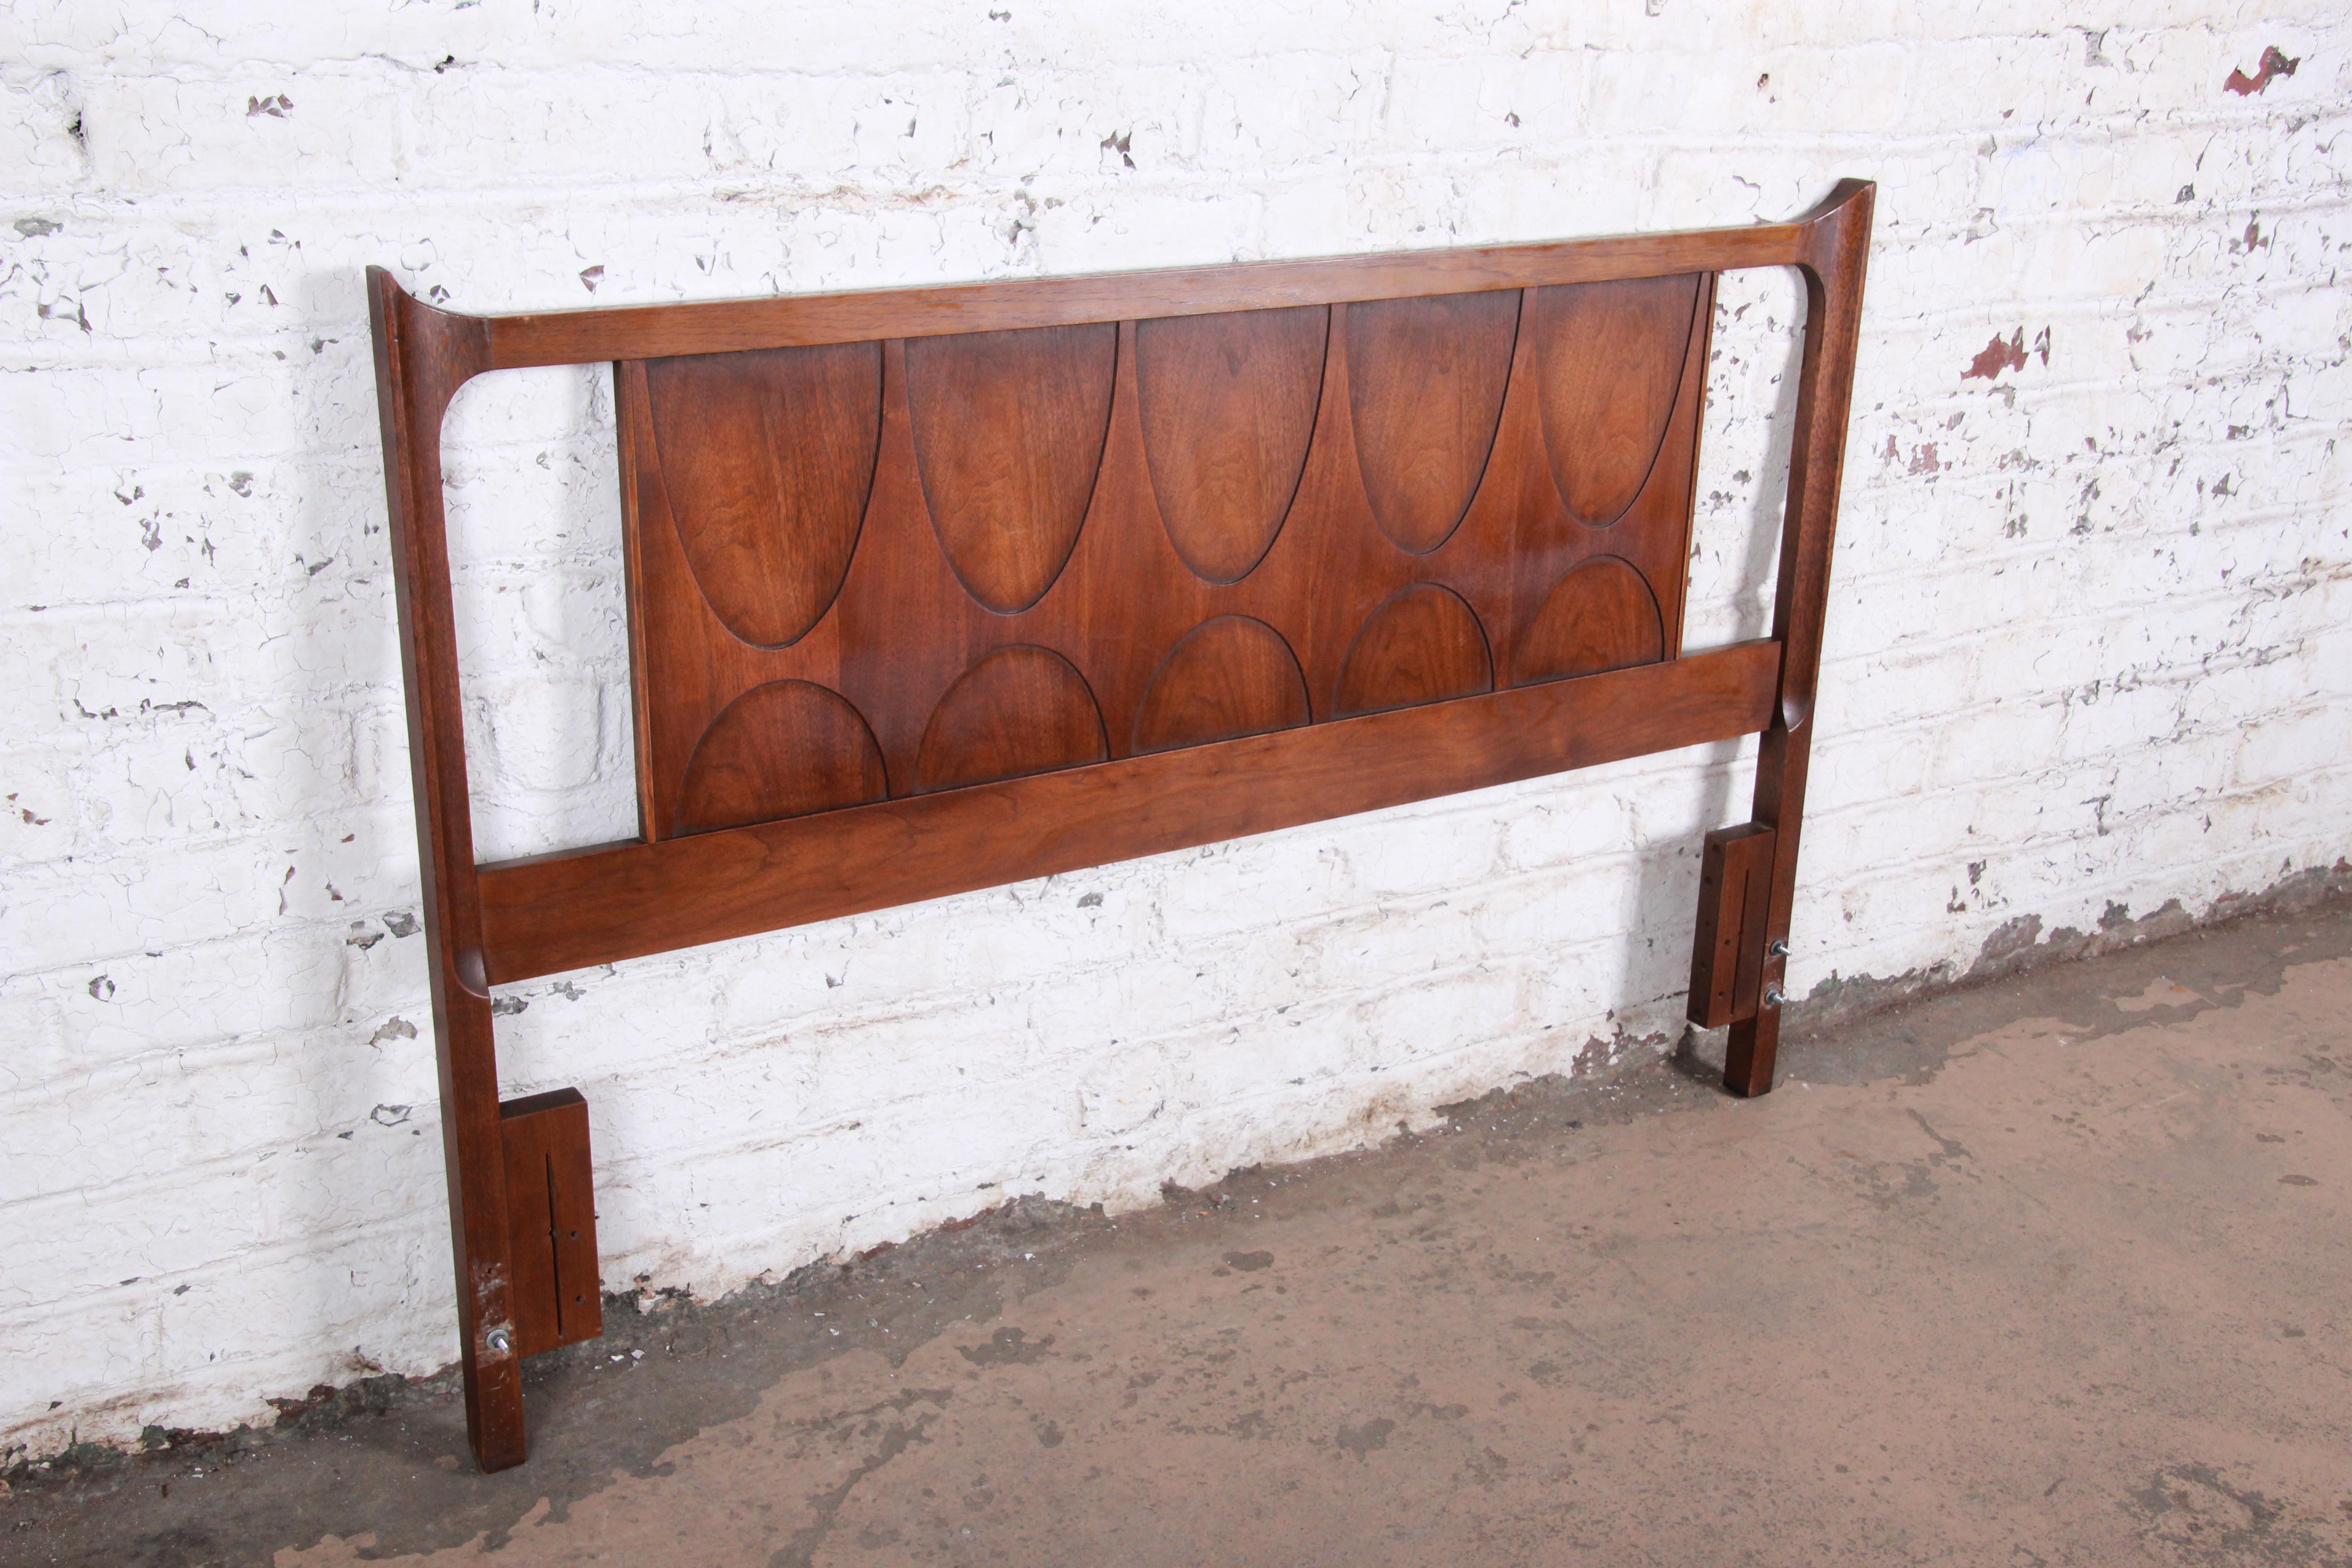 A stylish Mid-Century Modern sculpted walnut headboard by Broyhill Brasilia. The headboard features gorgeous walnut wood grain and the iconic arched Brasilia design. Works for both a queen or full size bed. The headboard is in very good original